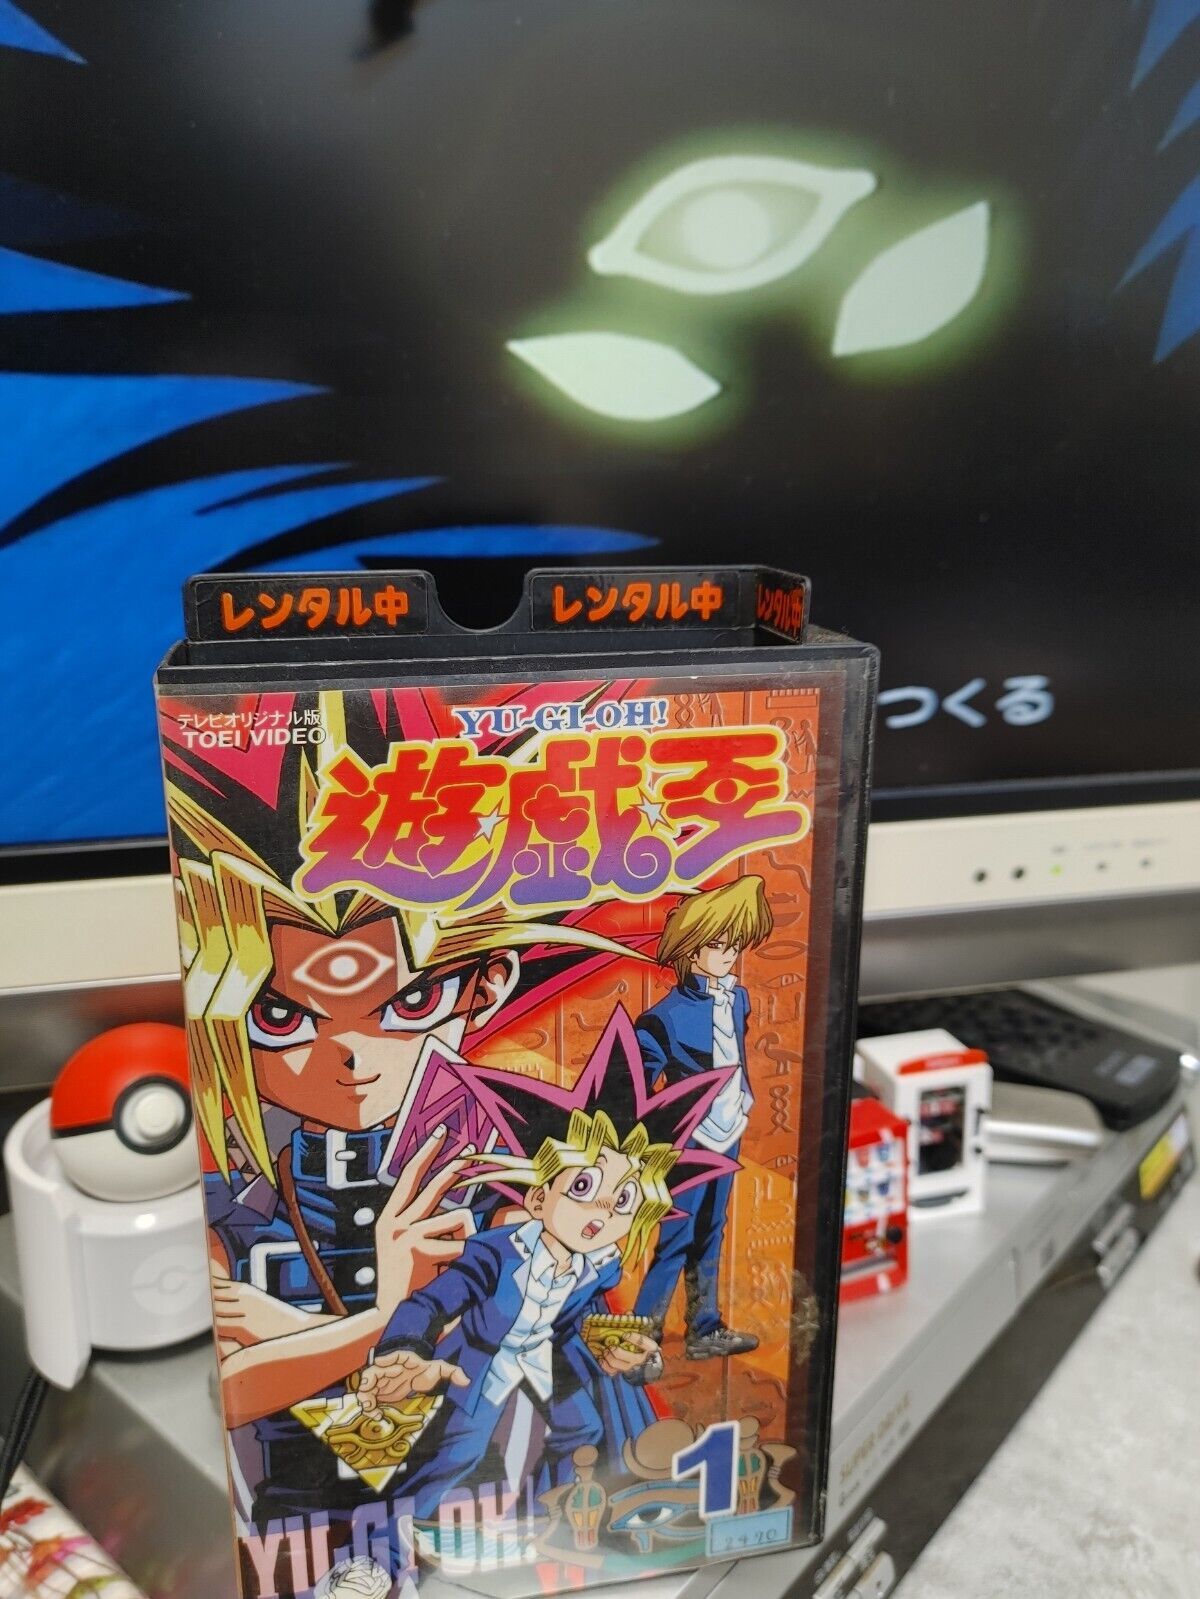 SUPER RARE Yu-Gi-Oh SEASON 0 VHS COLLECTION VHS COMPLETE TOEI LOT JAPAN RELEASE